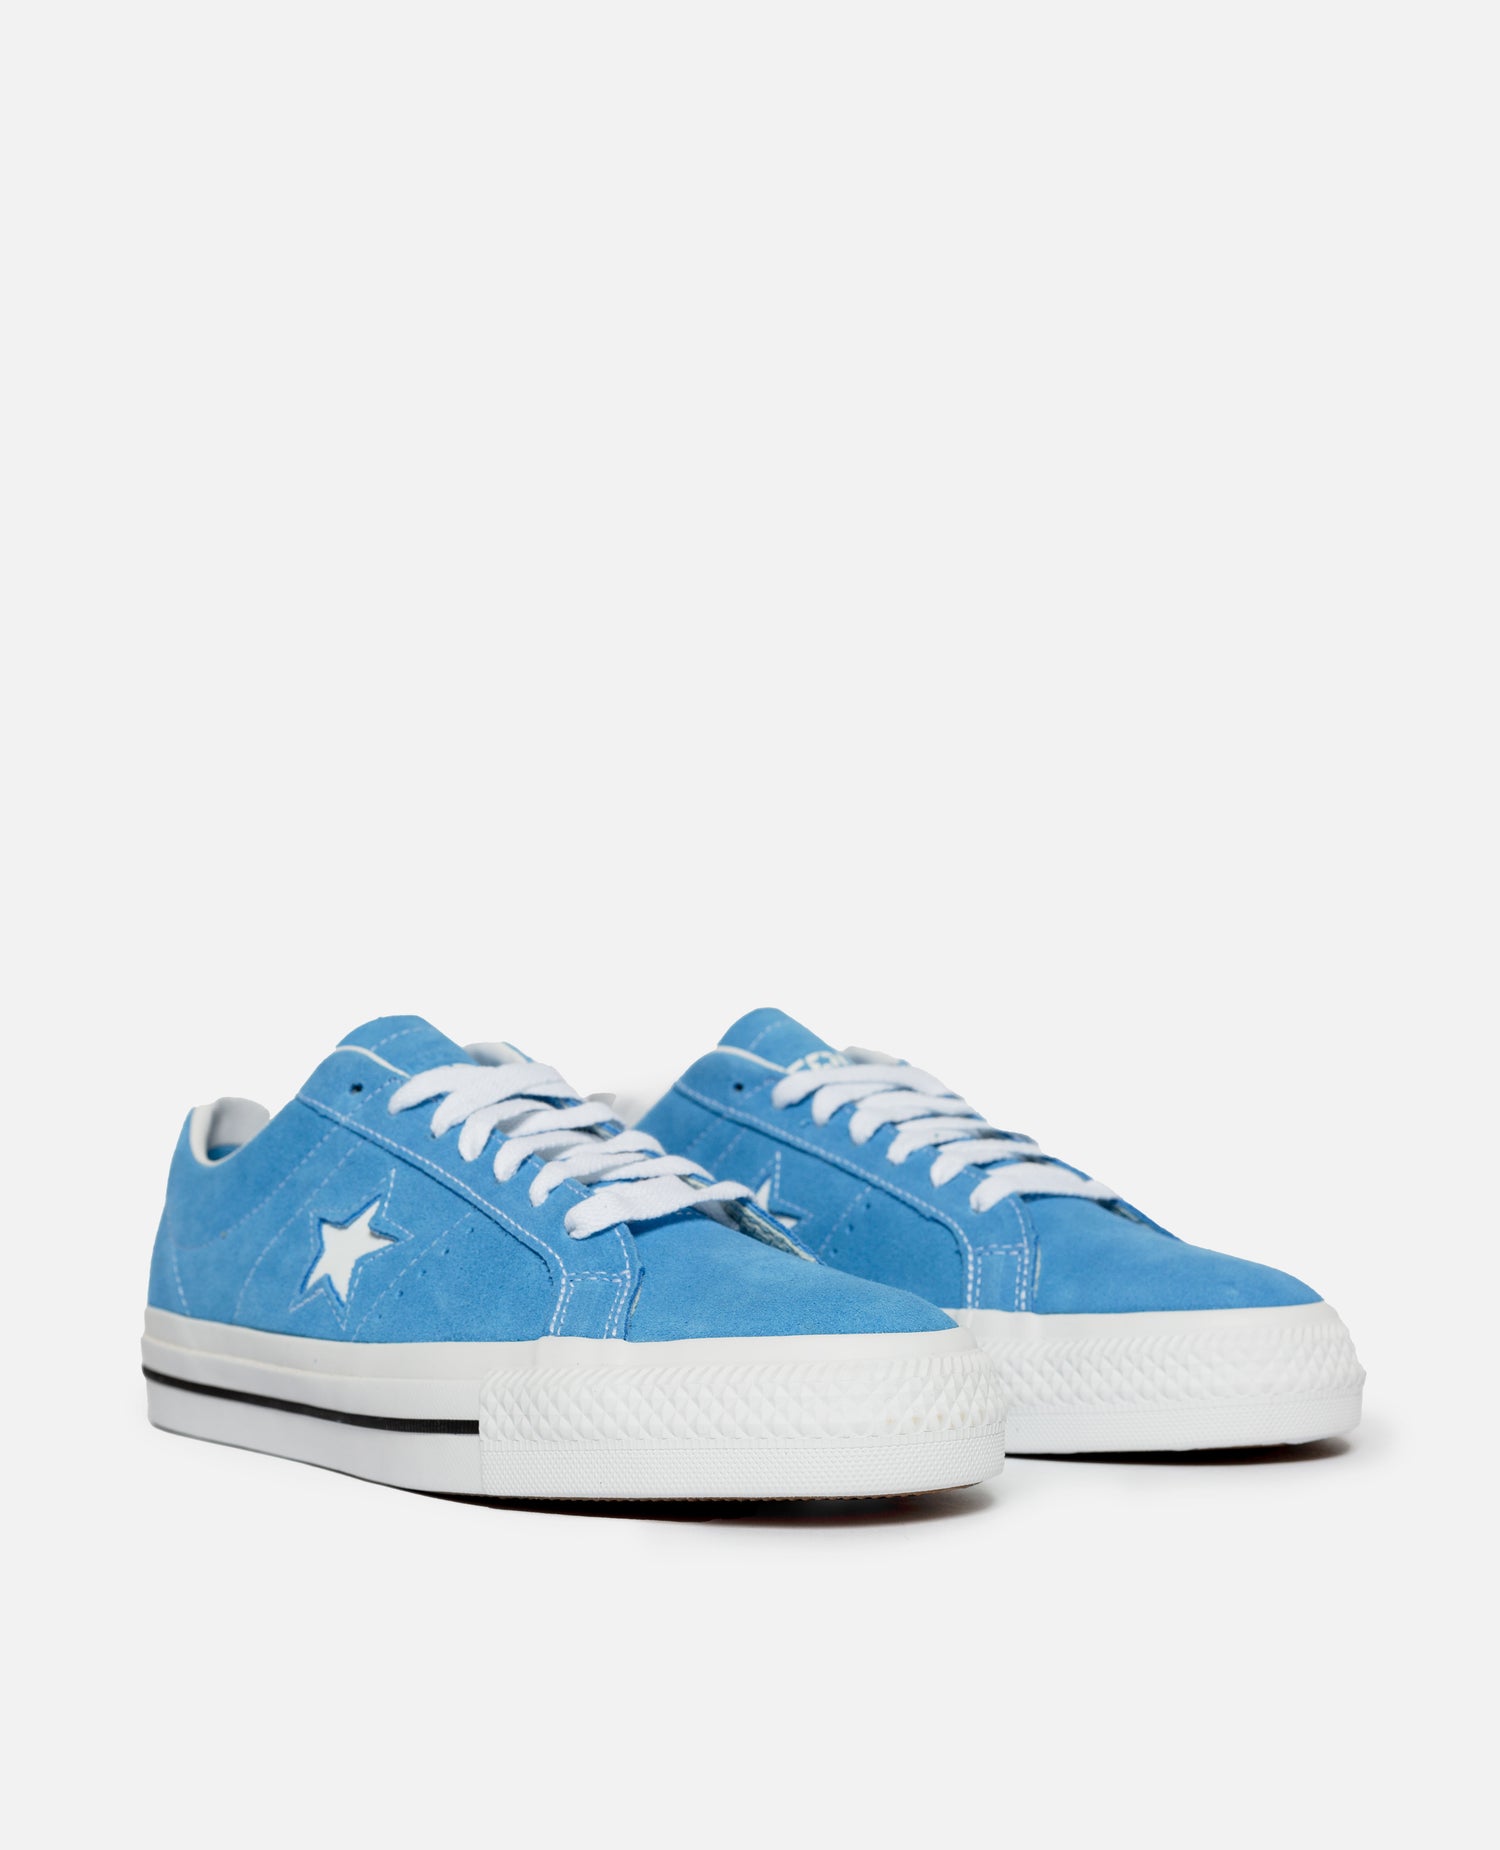 Converse One Star Pro Suede (University Blue/White)